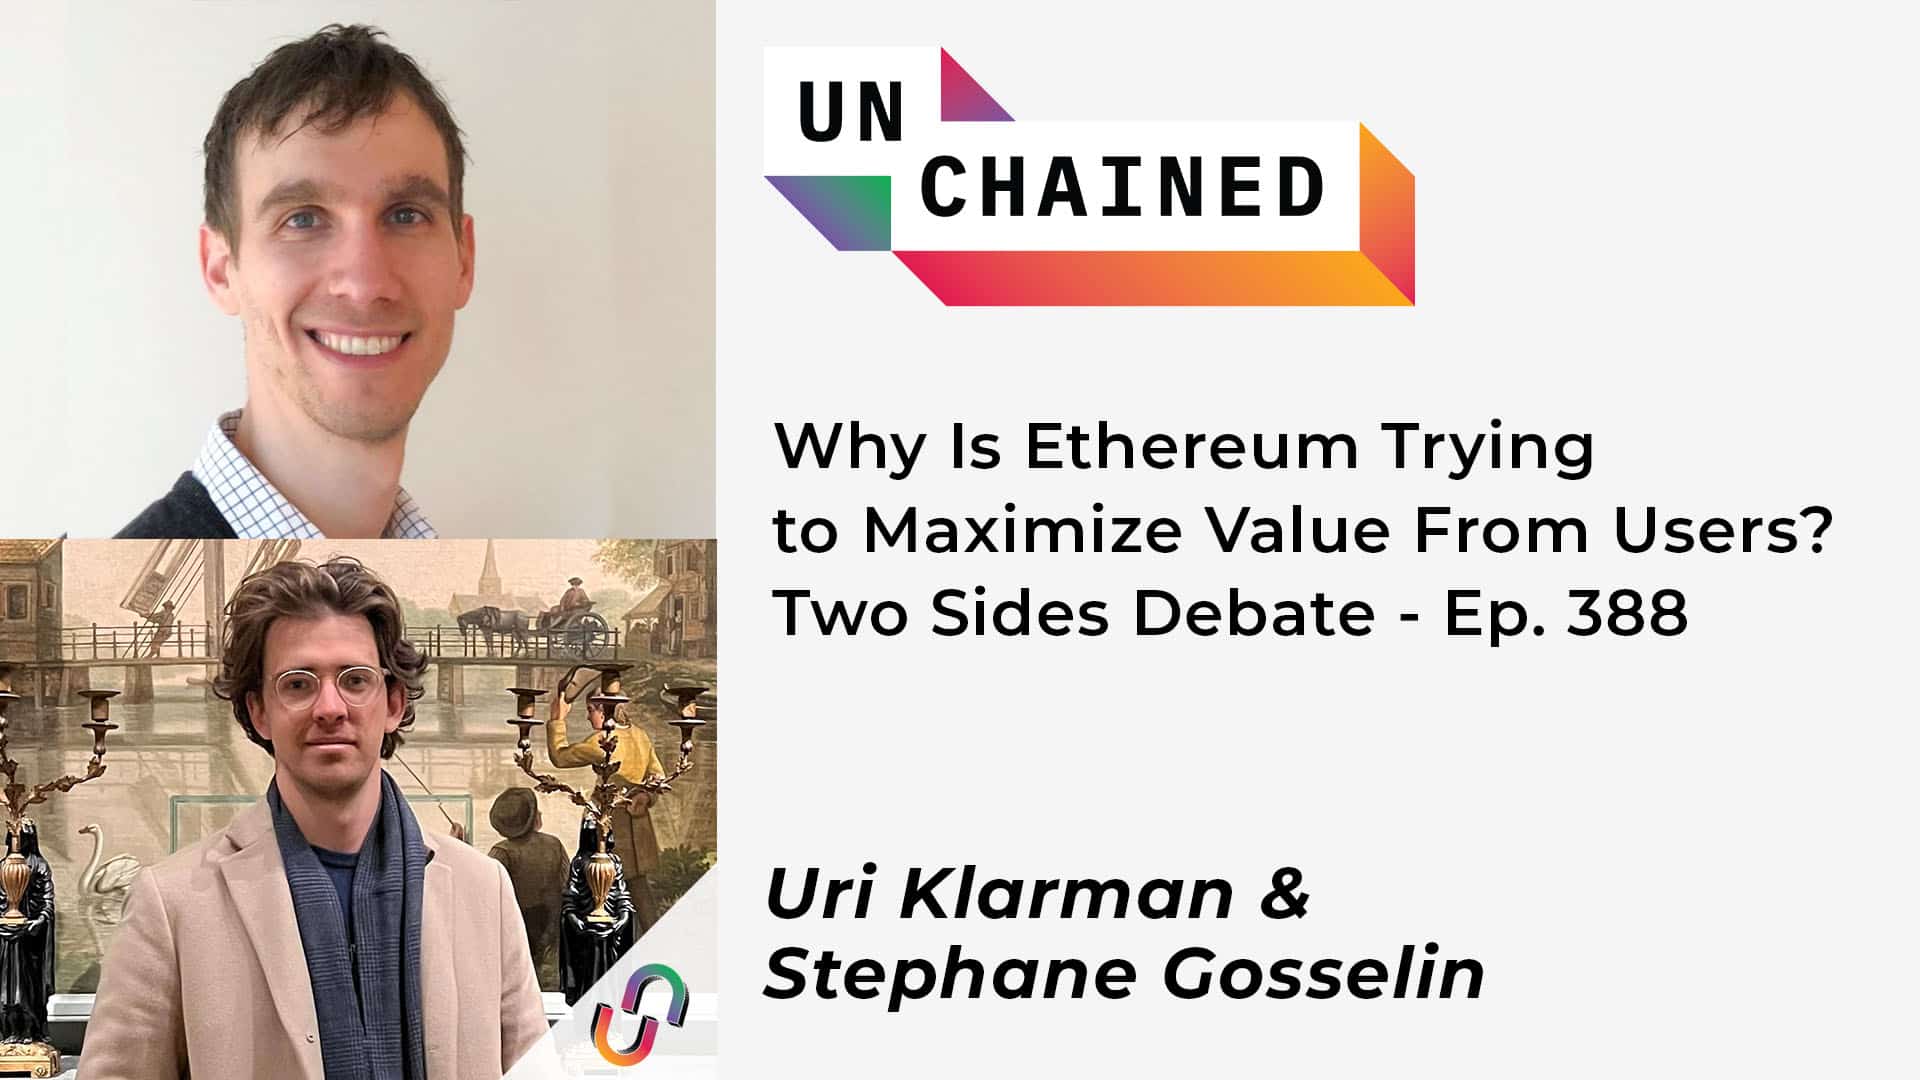 Why Is Ethereum Trying to Maximize Value From Users? Two Sides Debate - Ep. 388